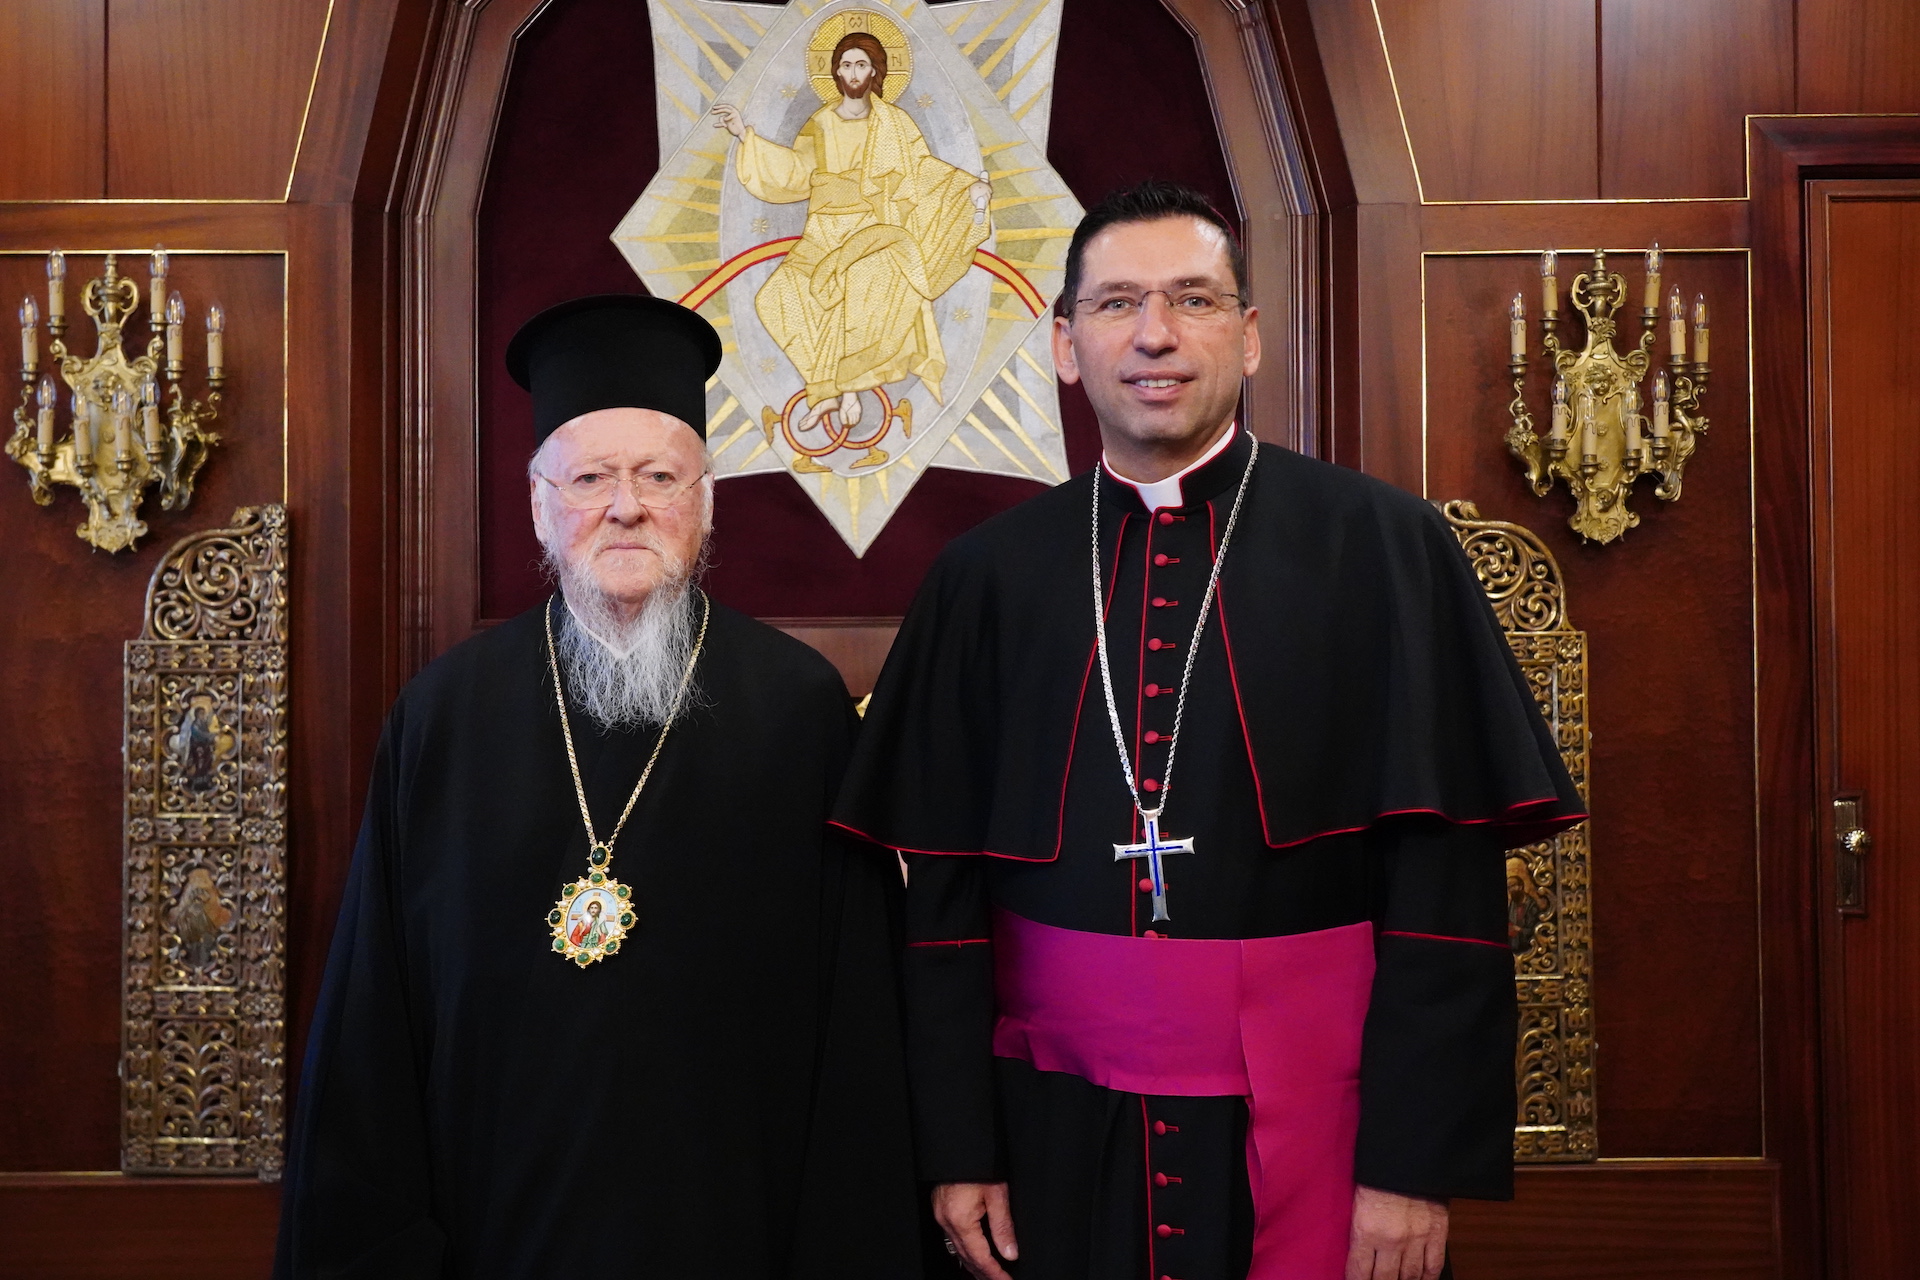 Group of Roman Catholic Hierarchs and clergy visit the Ecumenical Patriarch at the Phanar